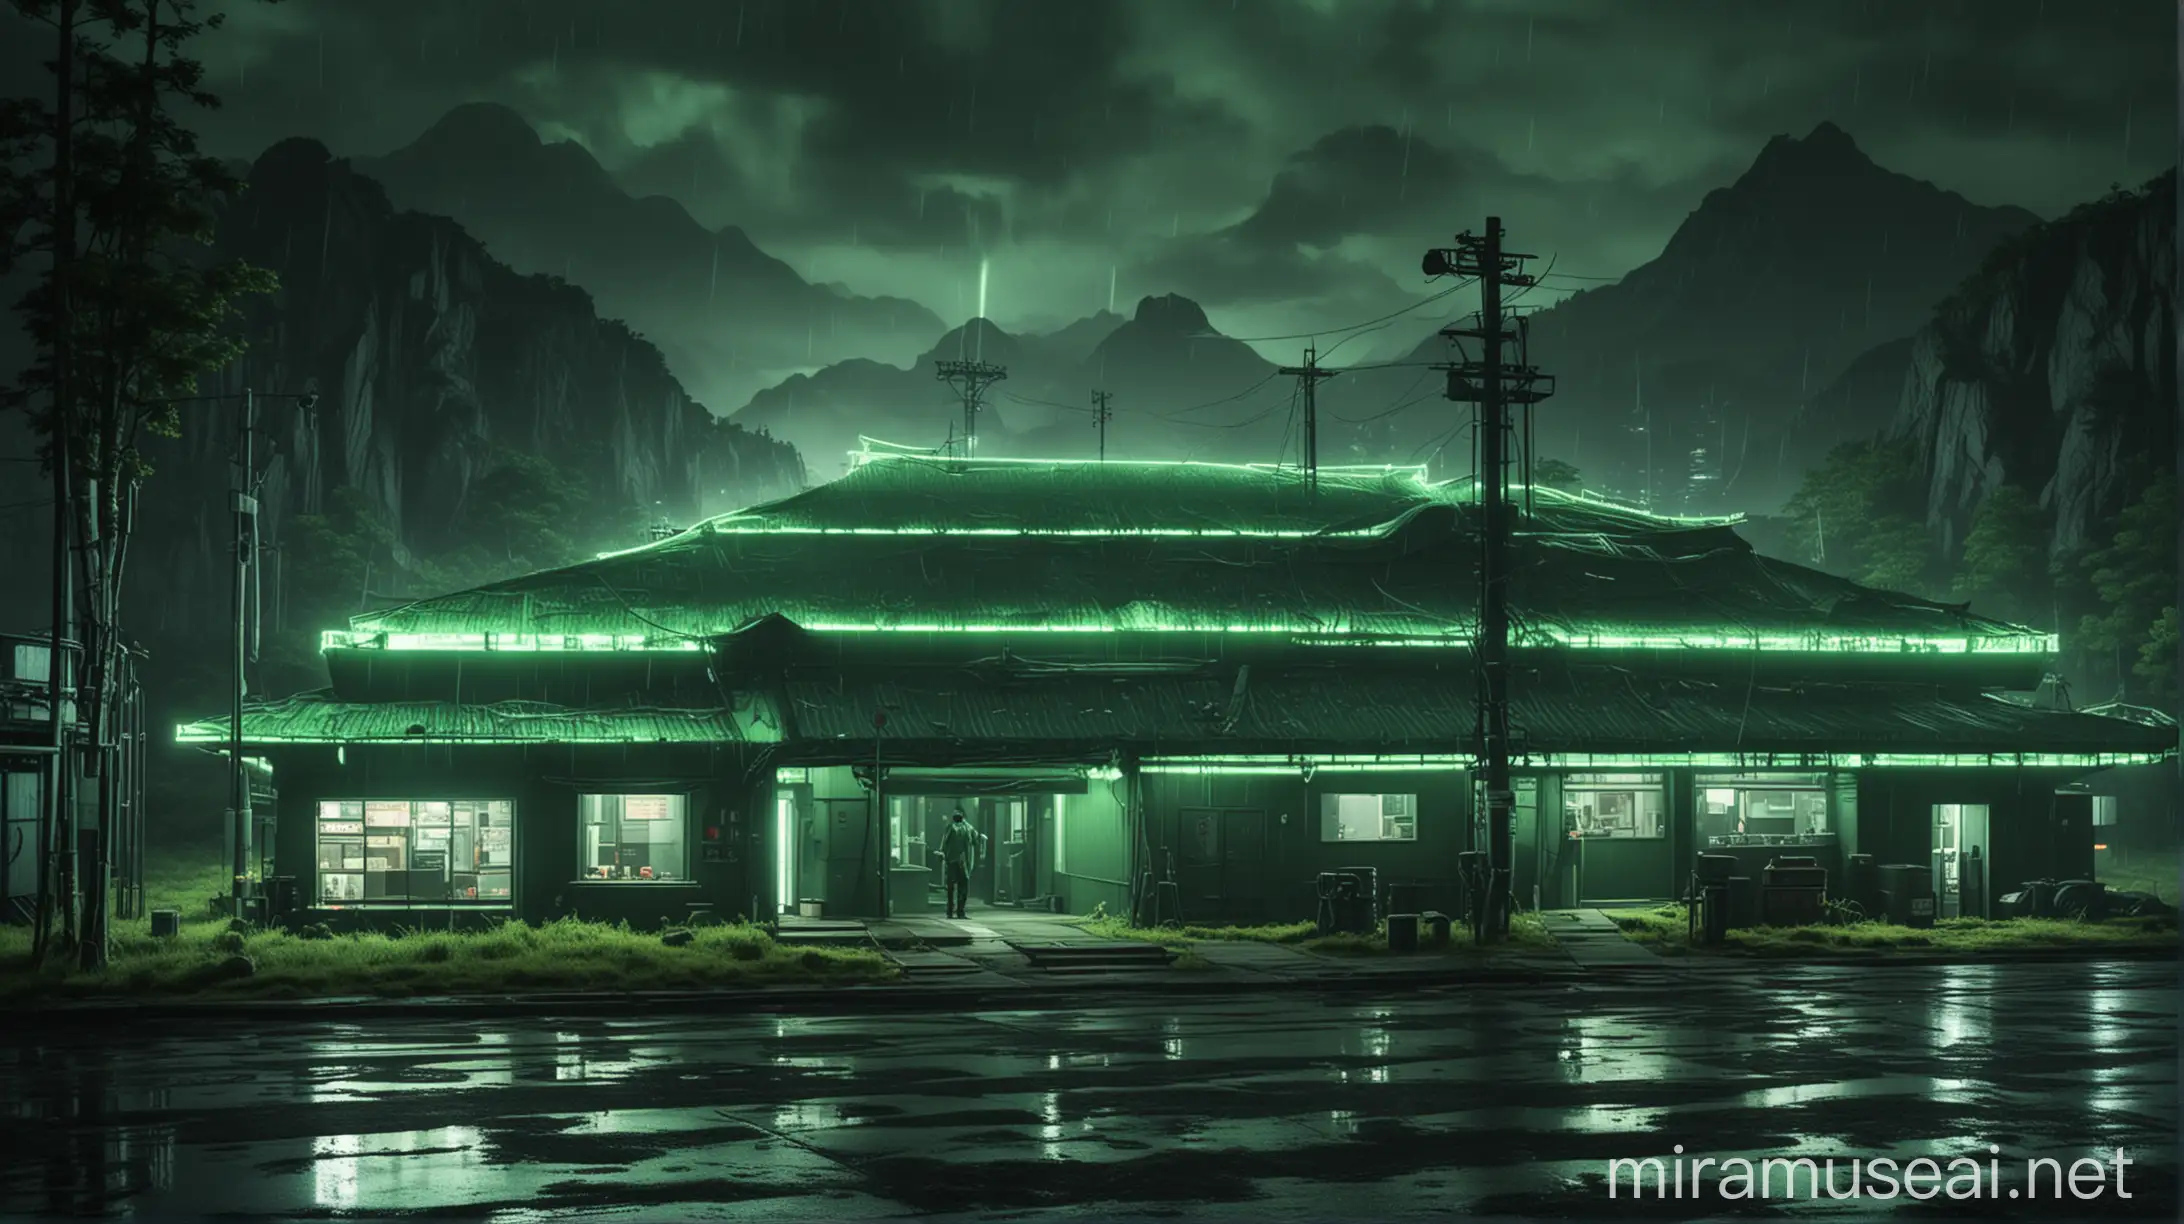 Futuristic Japanese Research Center Amidst Rainy Green Neon Glow